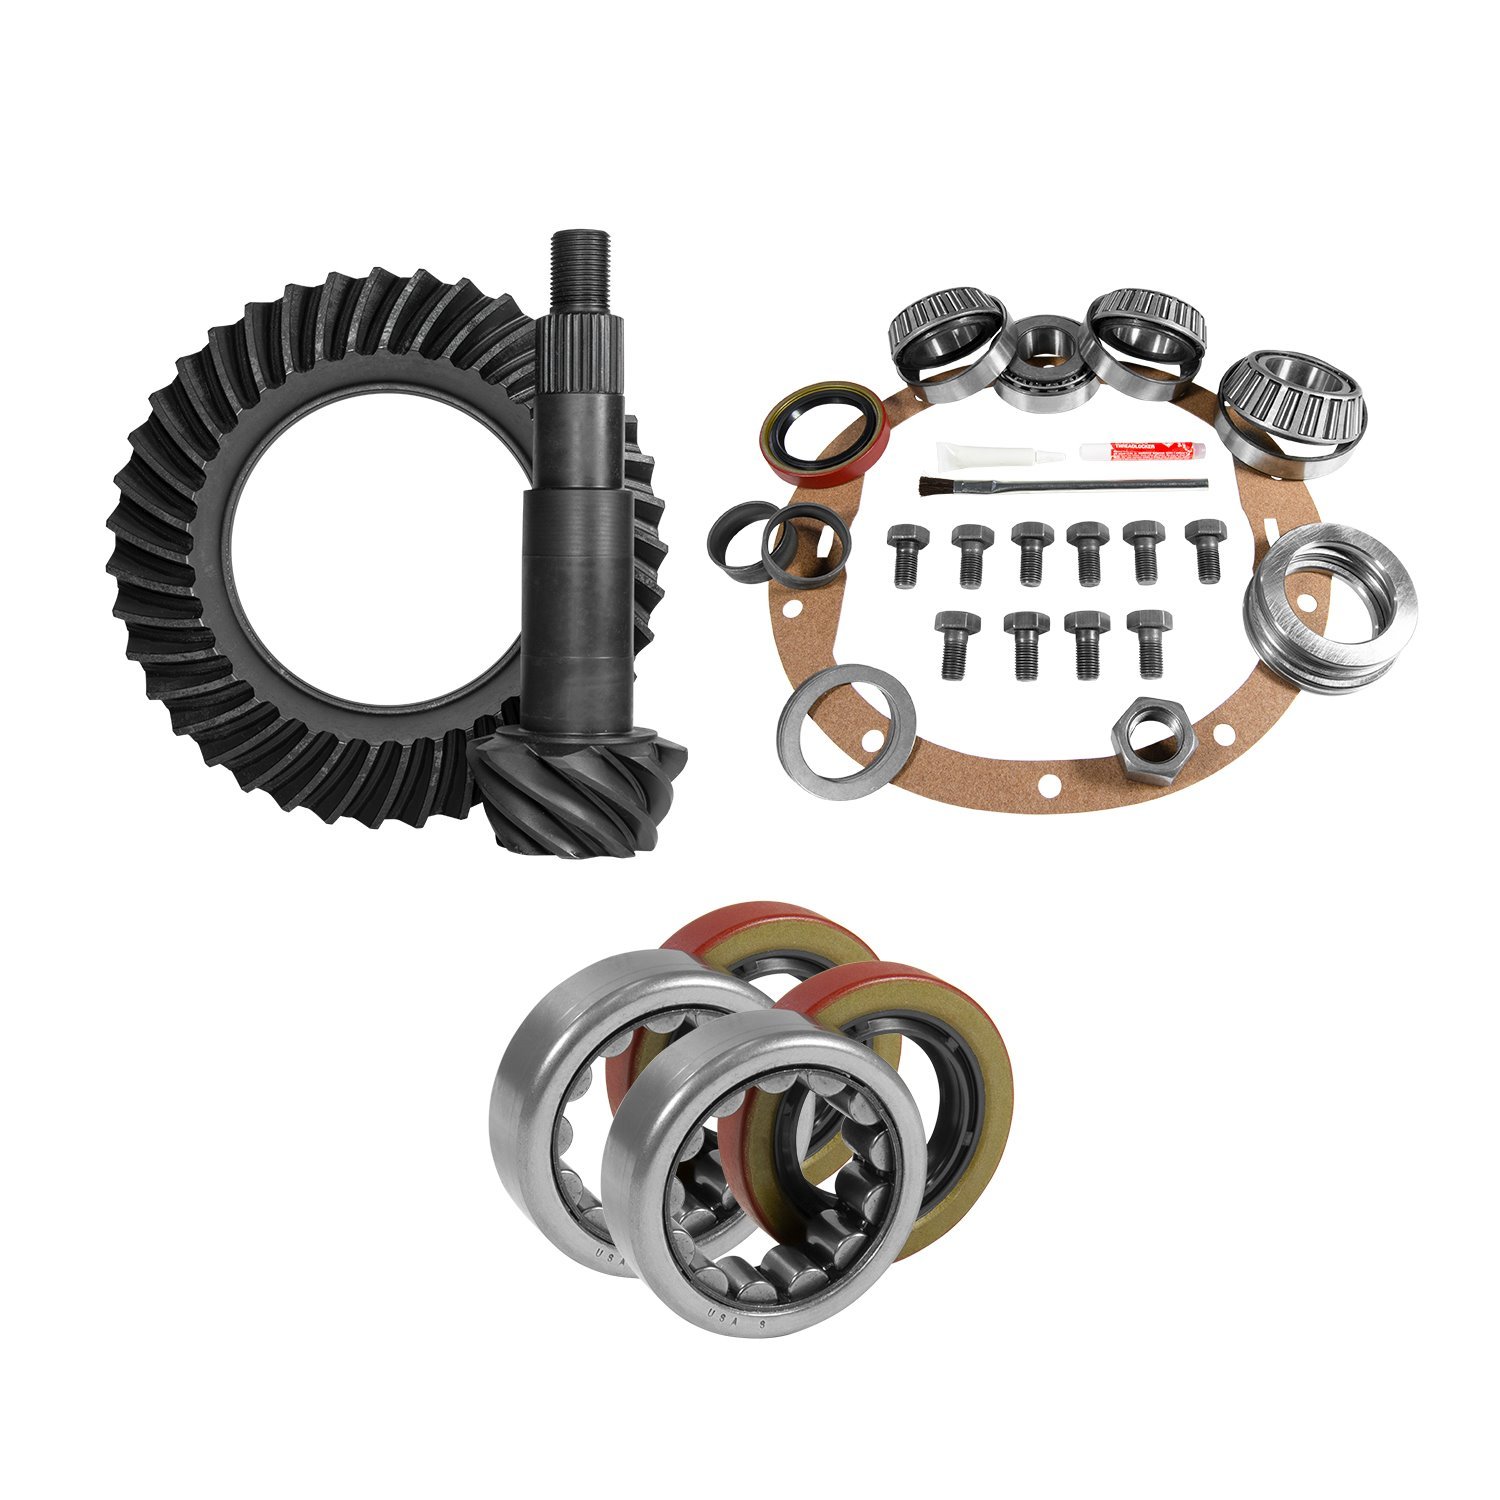 Muscle Car Re-Gear Kit For GM 8.5 in. Diff, 30 Spline, 3.73 Ratio